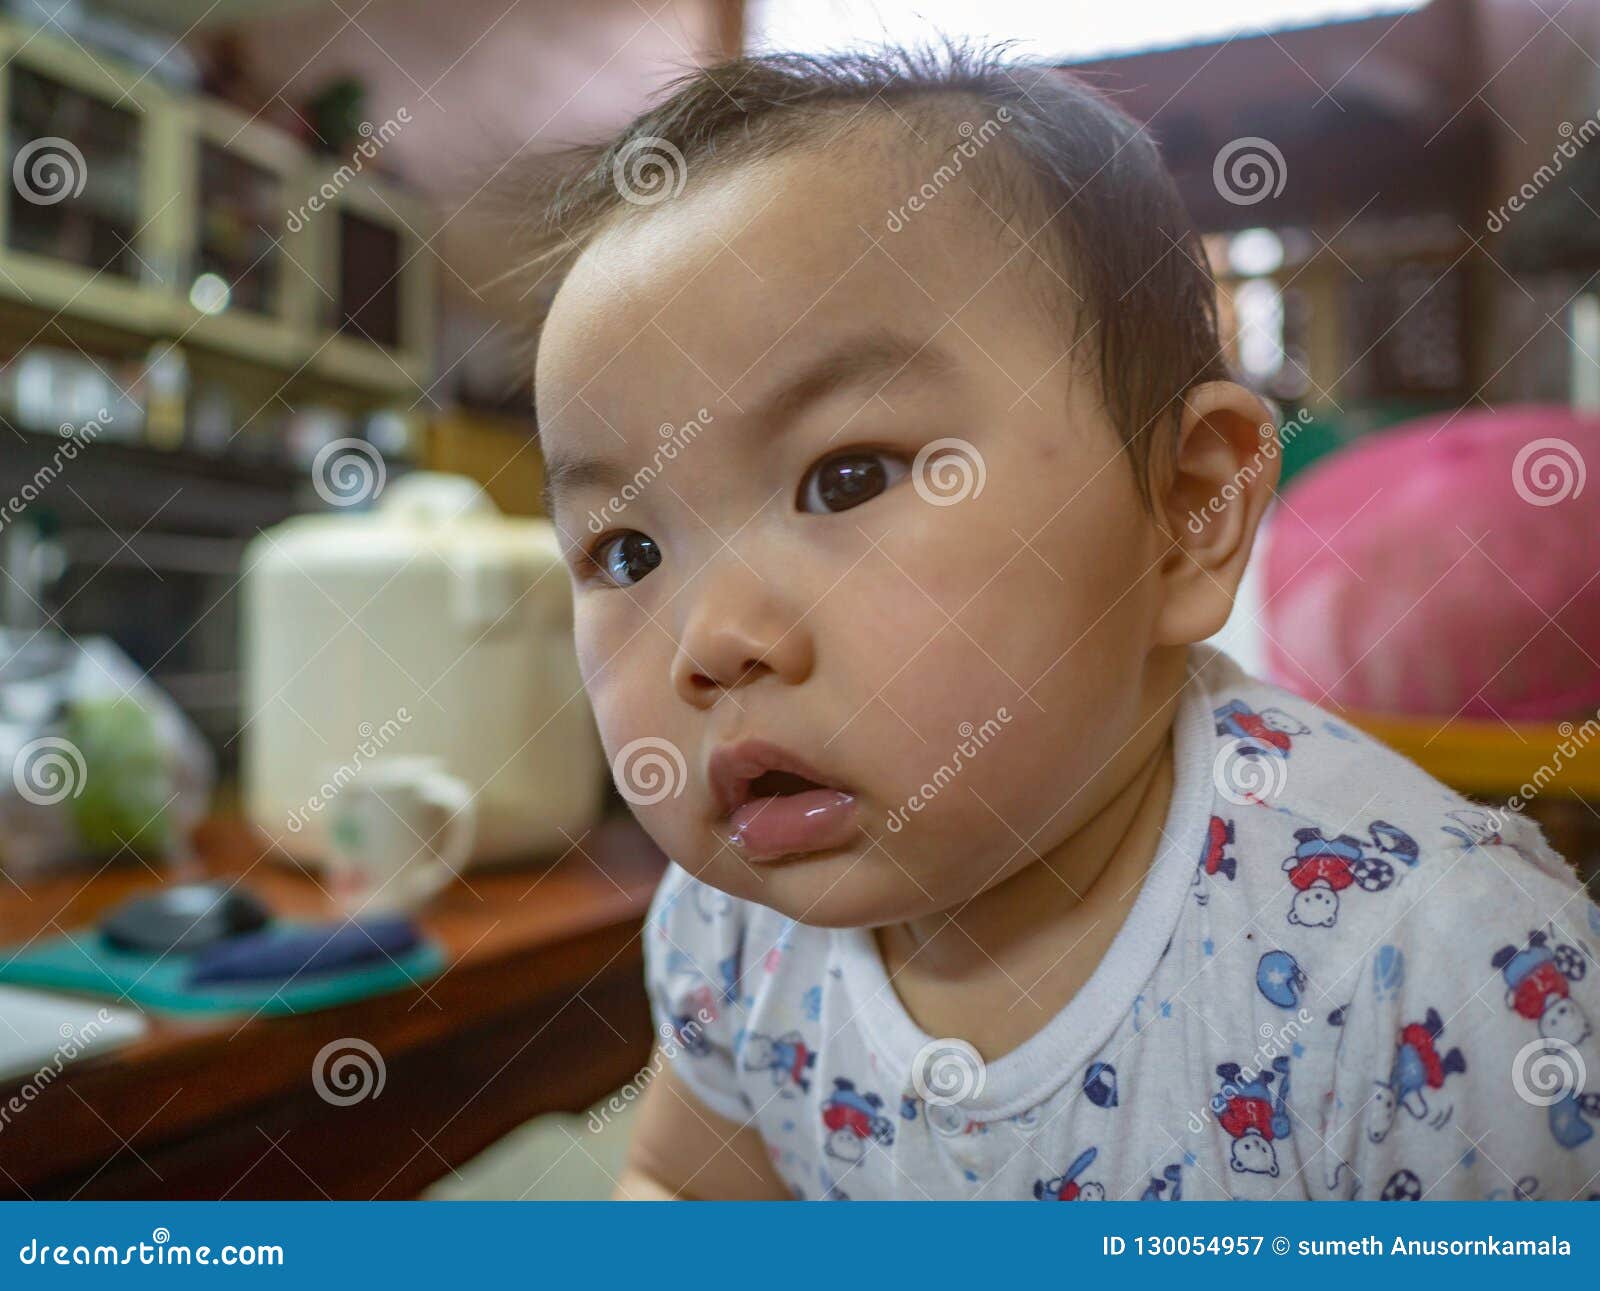 Cutie Handsome Asian Boy Baby Stock Image - Image of asian, closeup ...